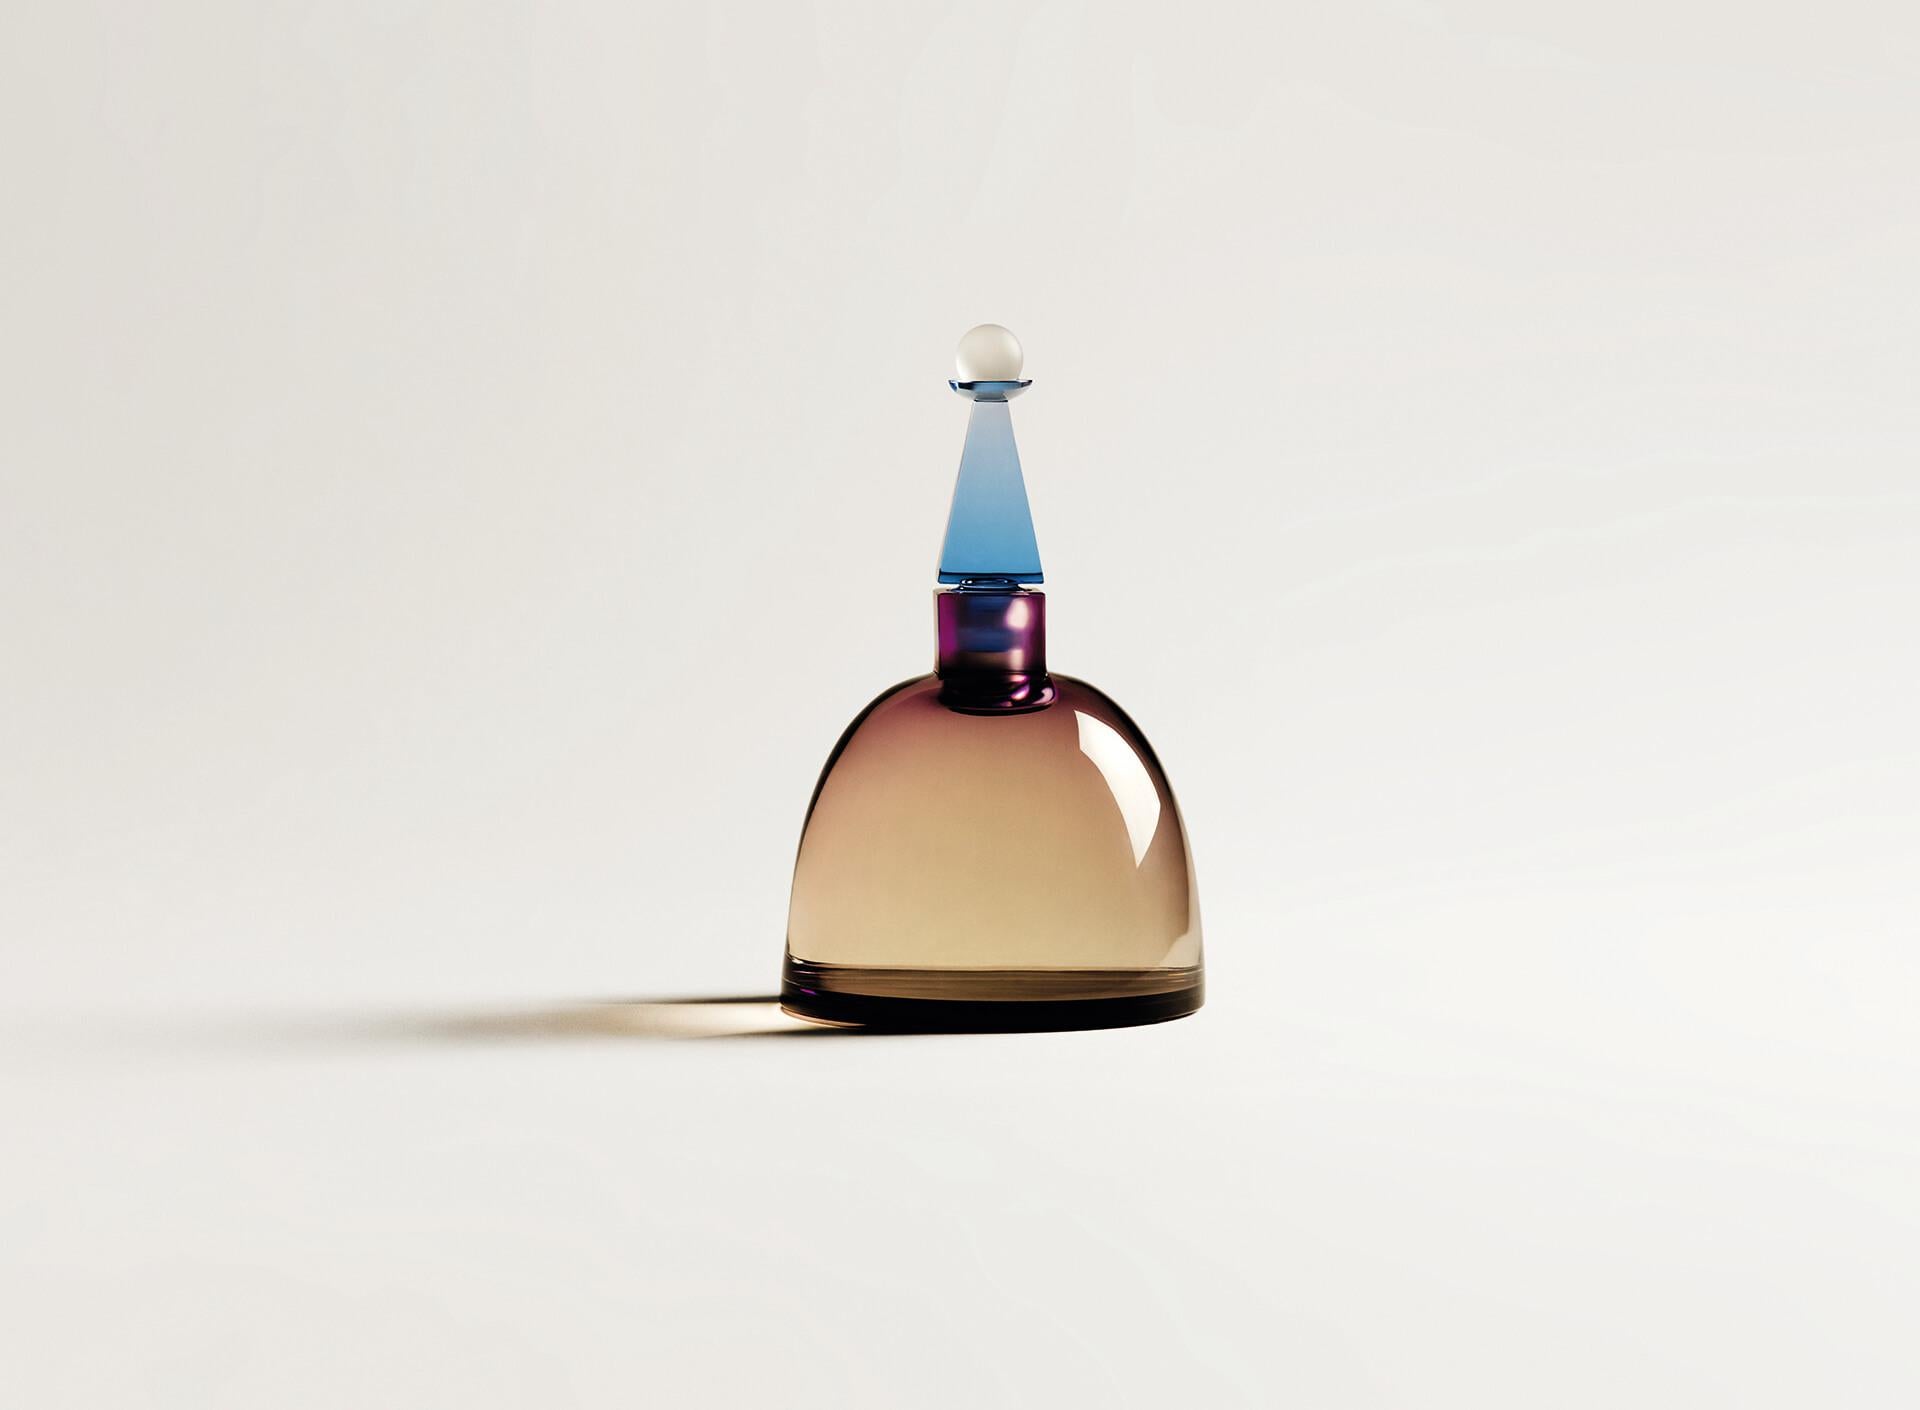 Purple Sage, 2022, Turrell, crystal bottle, limited editions, Perfume, light art - Sculpture by James Turrell